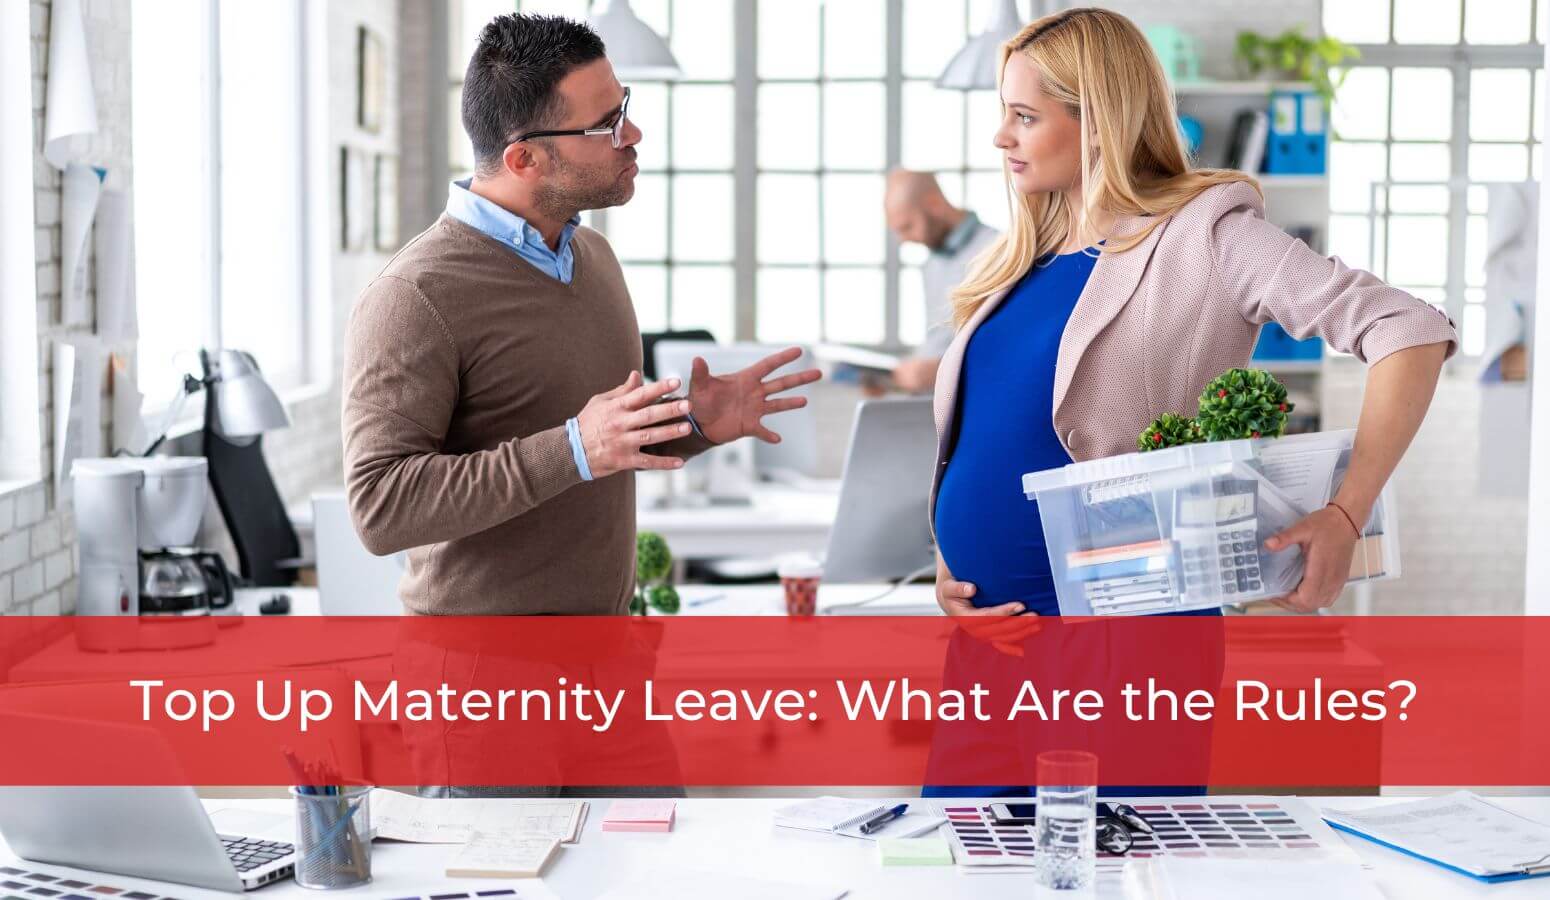 Top up maternity leave